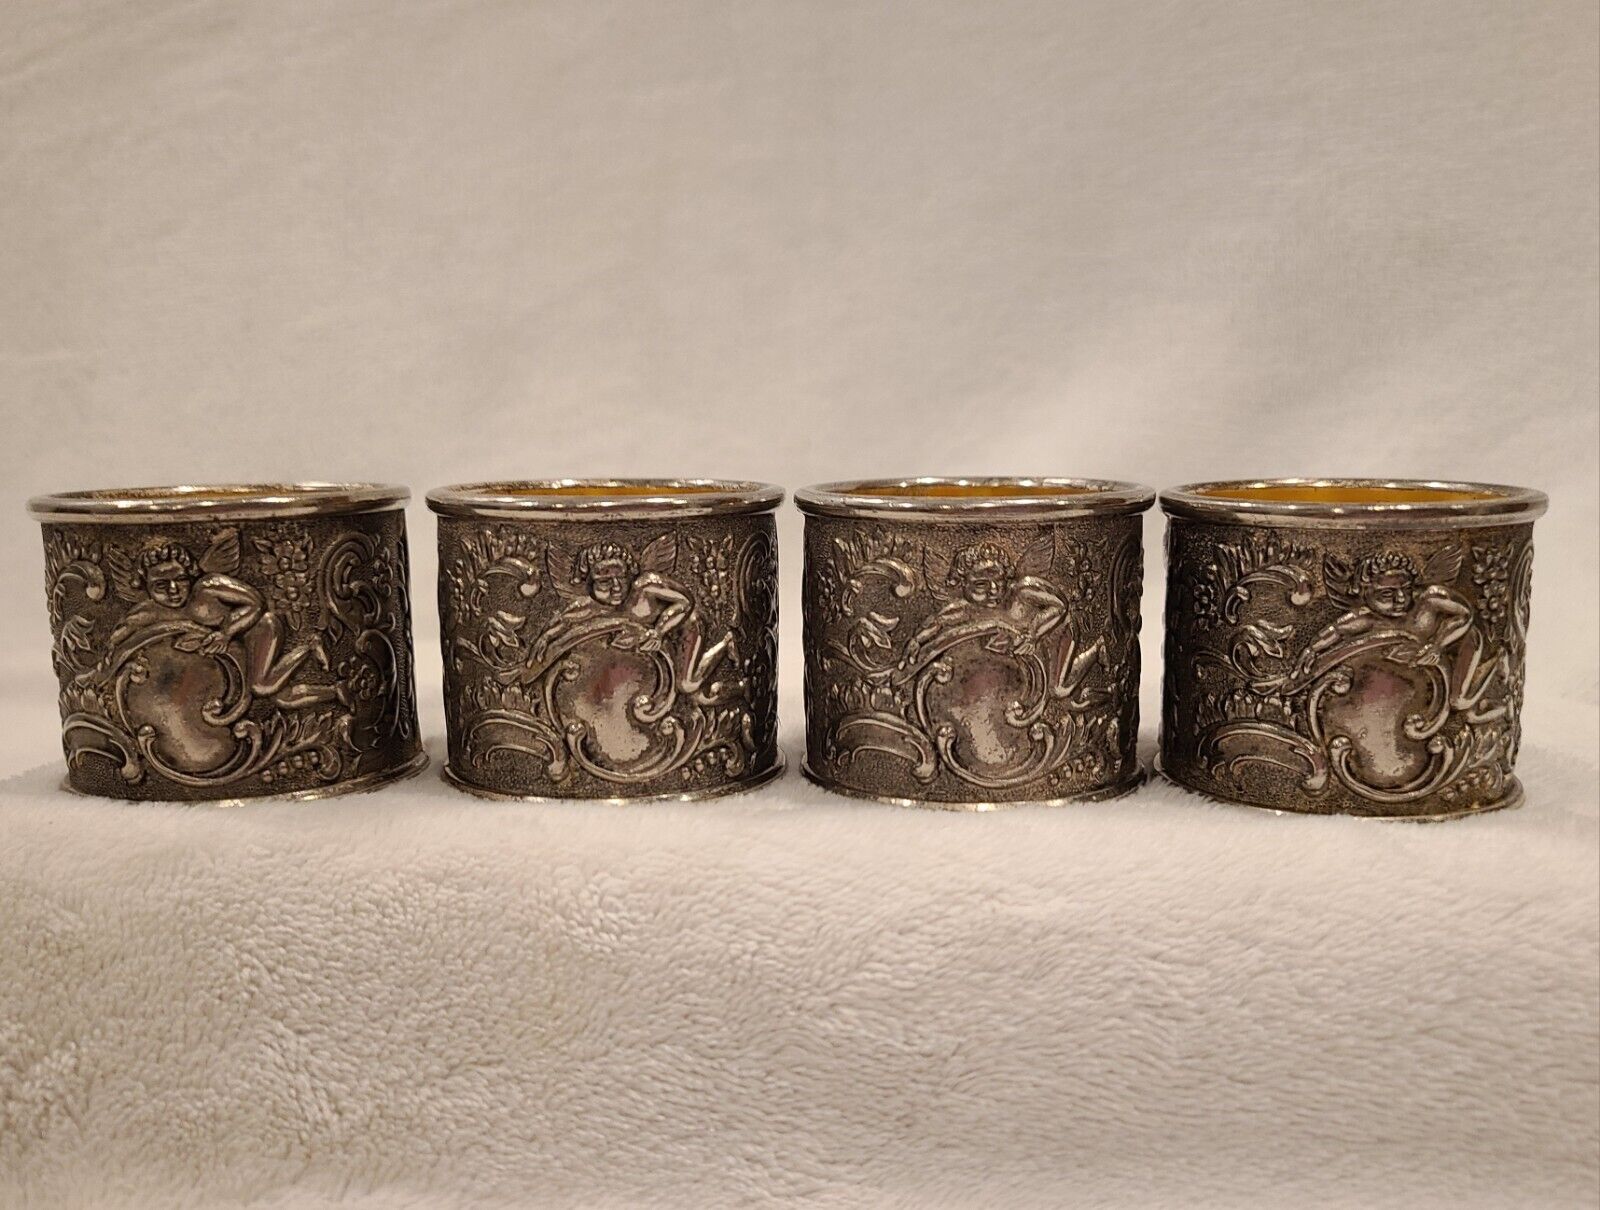 Silver Plated Napkin Rings w Cherubs & Scroll Work Holiday Imports Set of 4